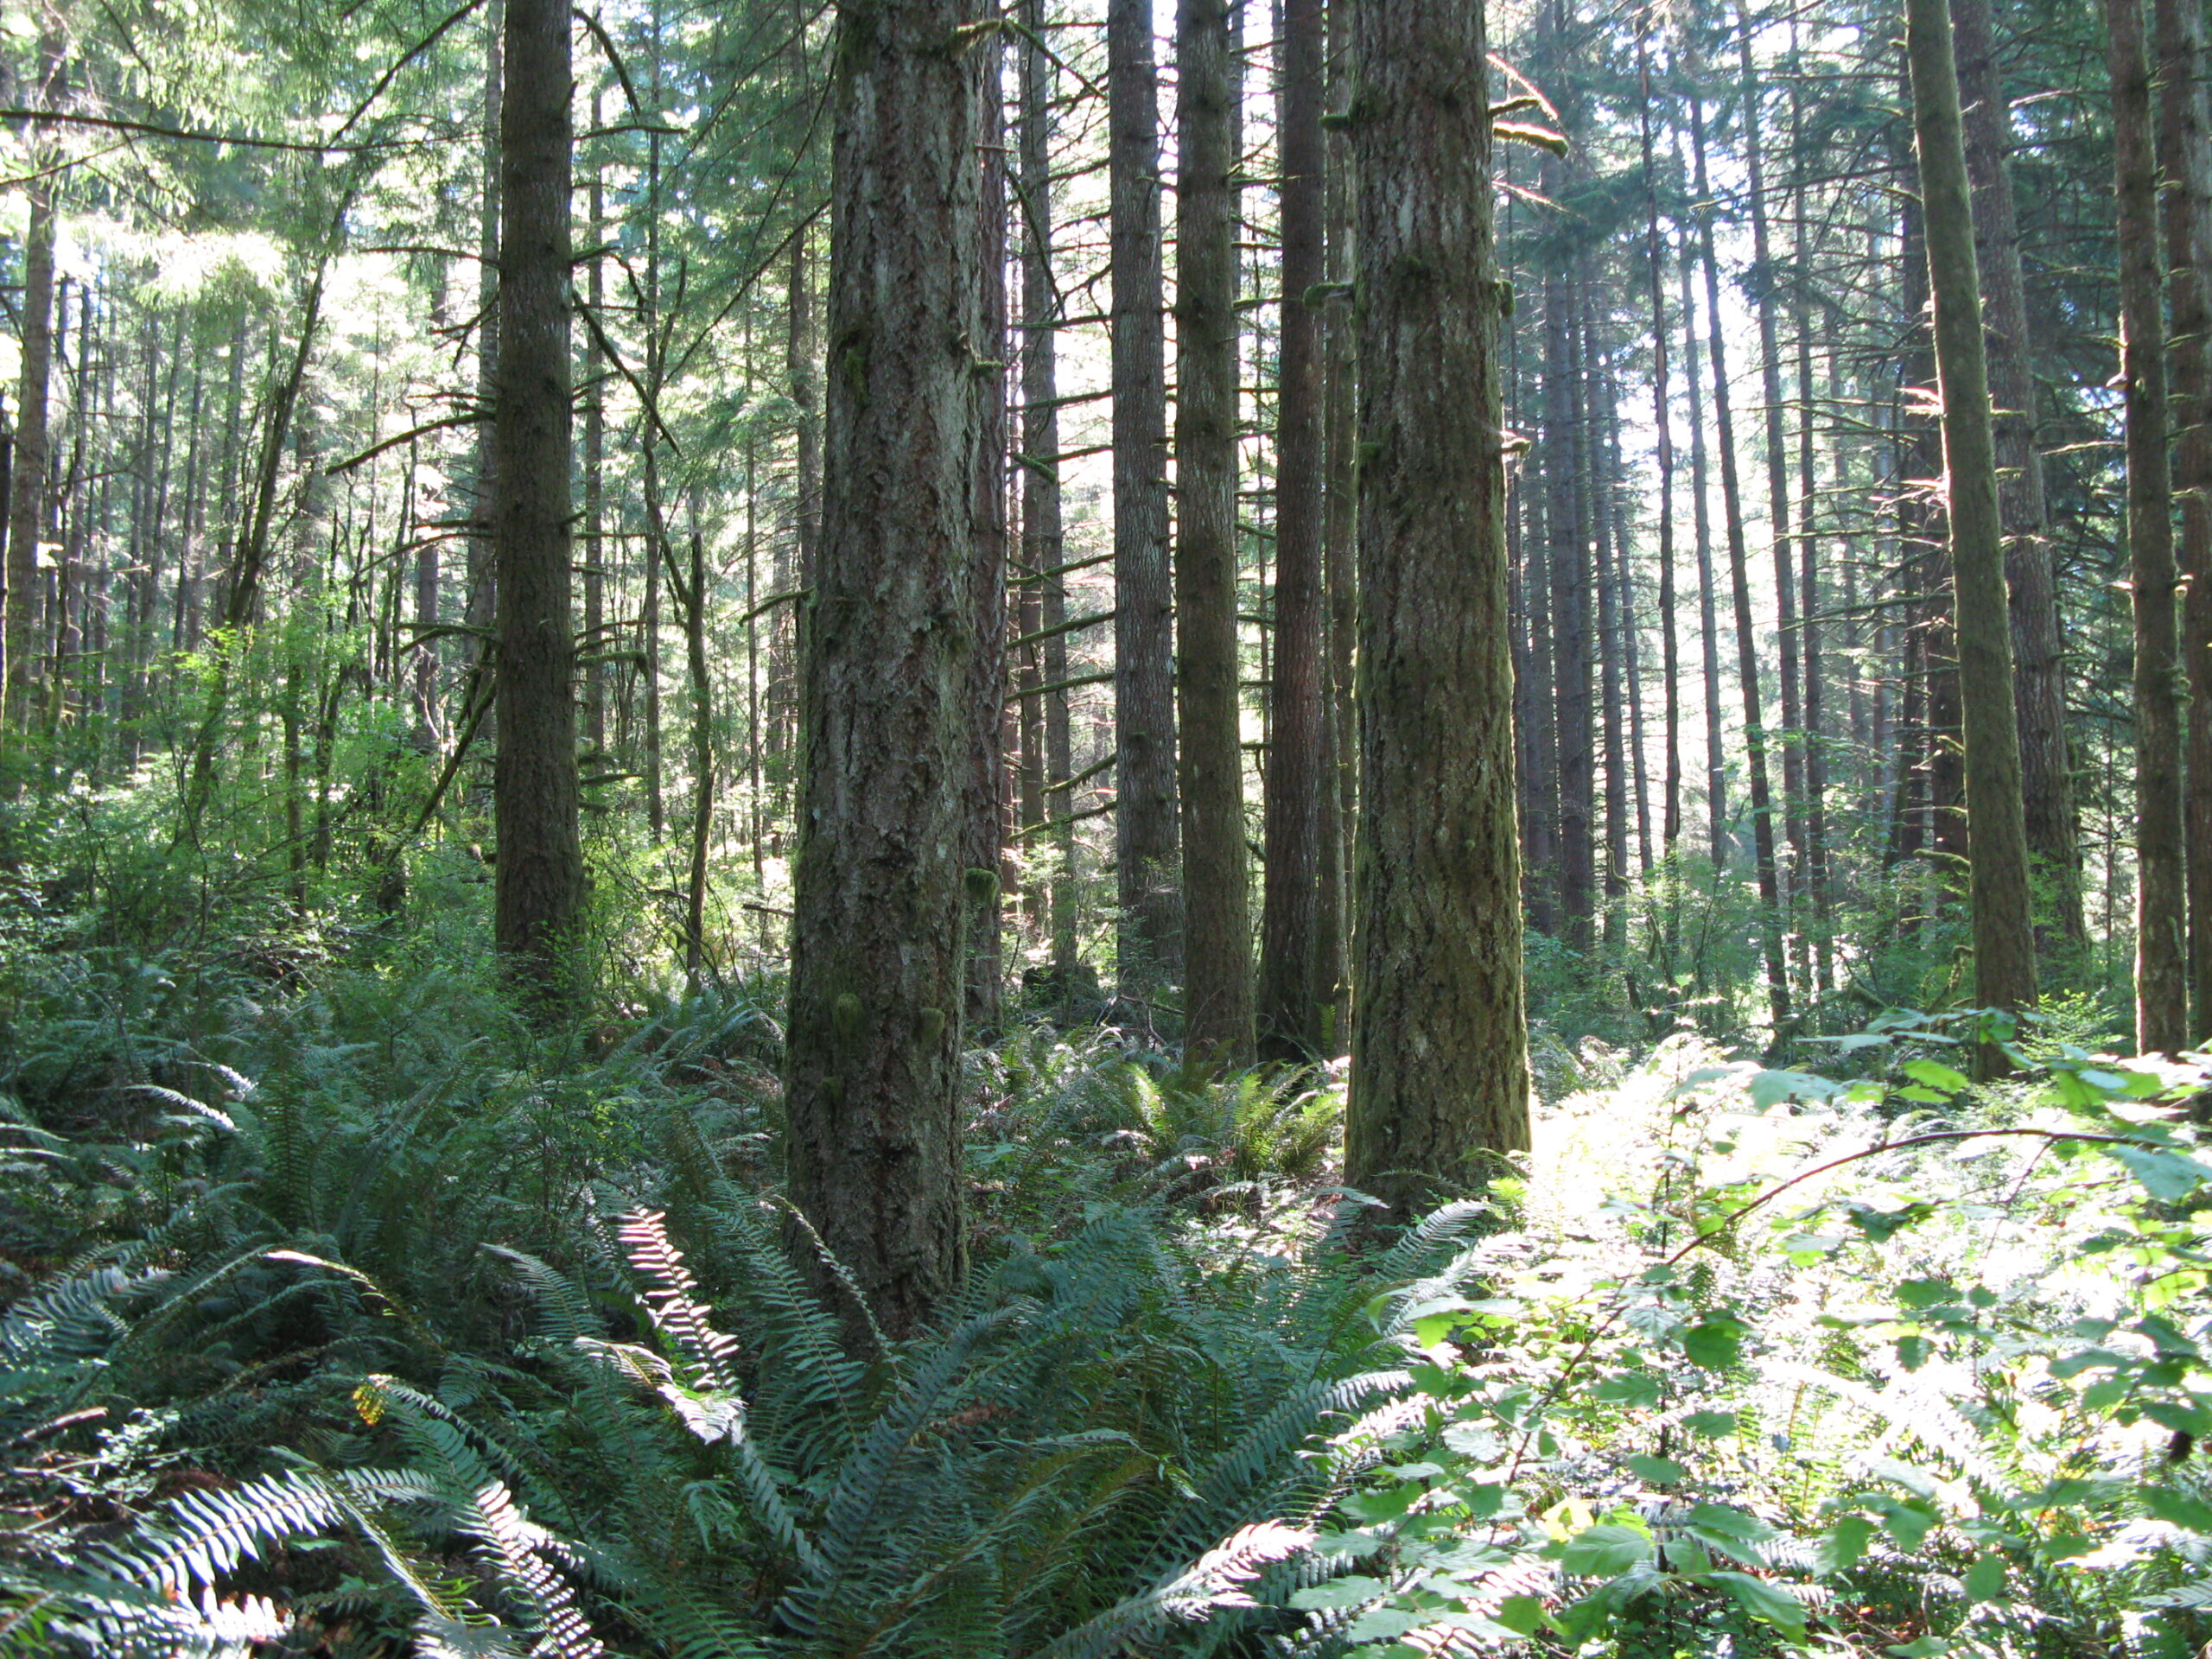 A wide view of doug firs amongst a thick green fern understory.